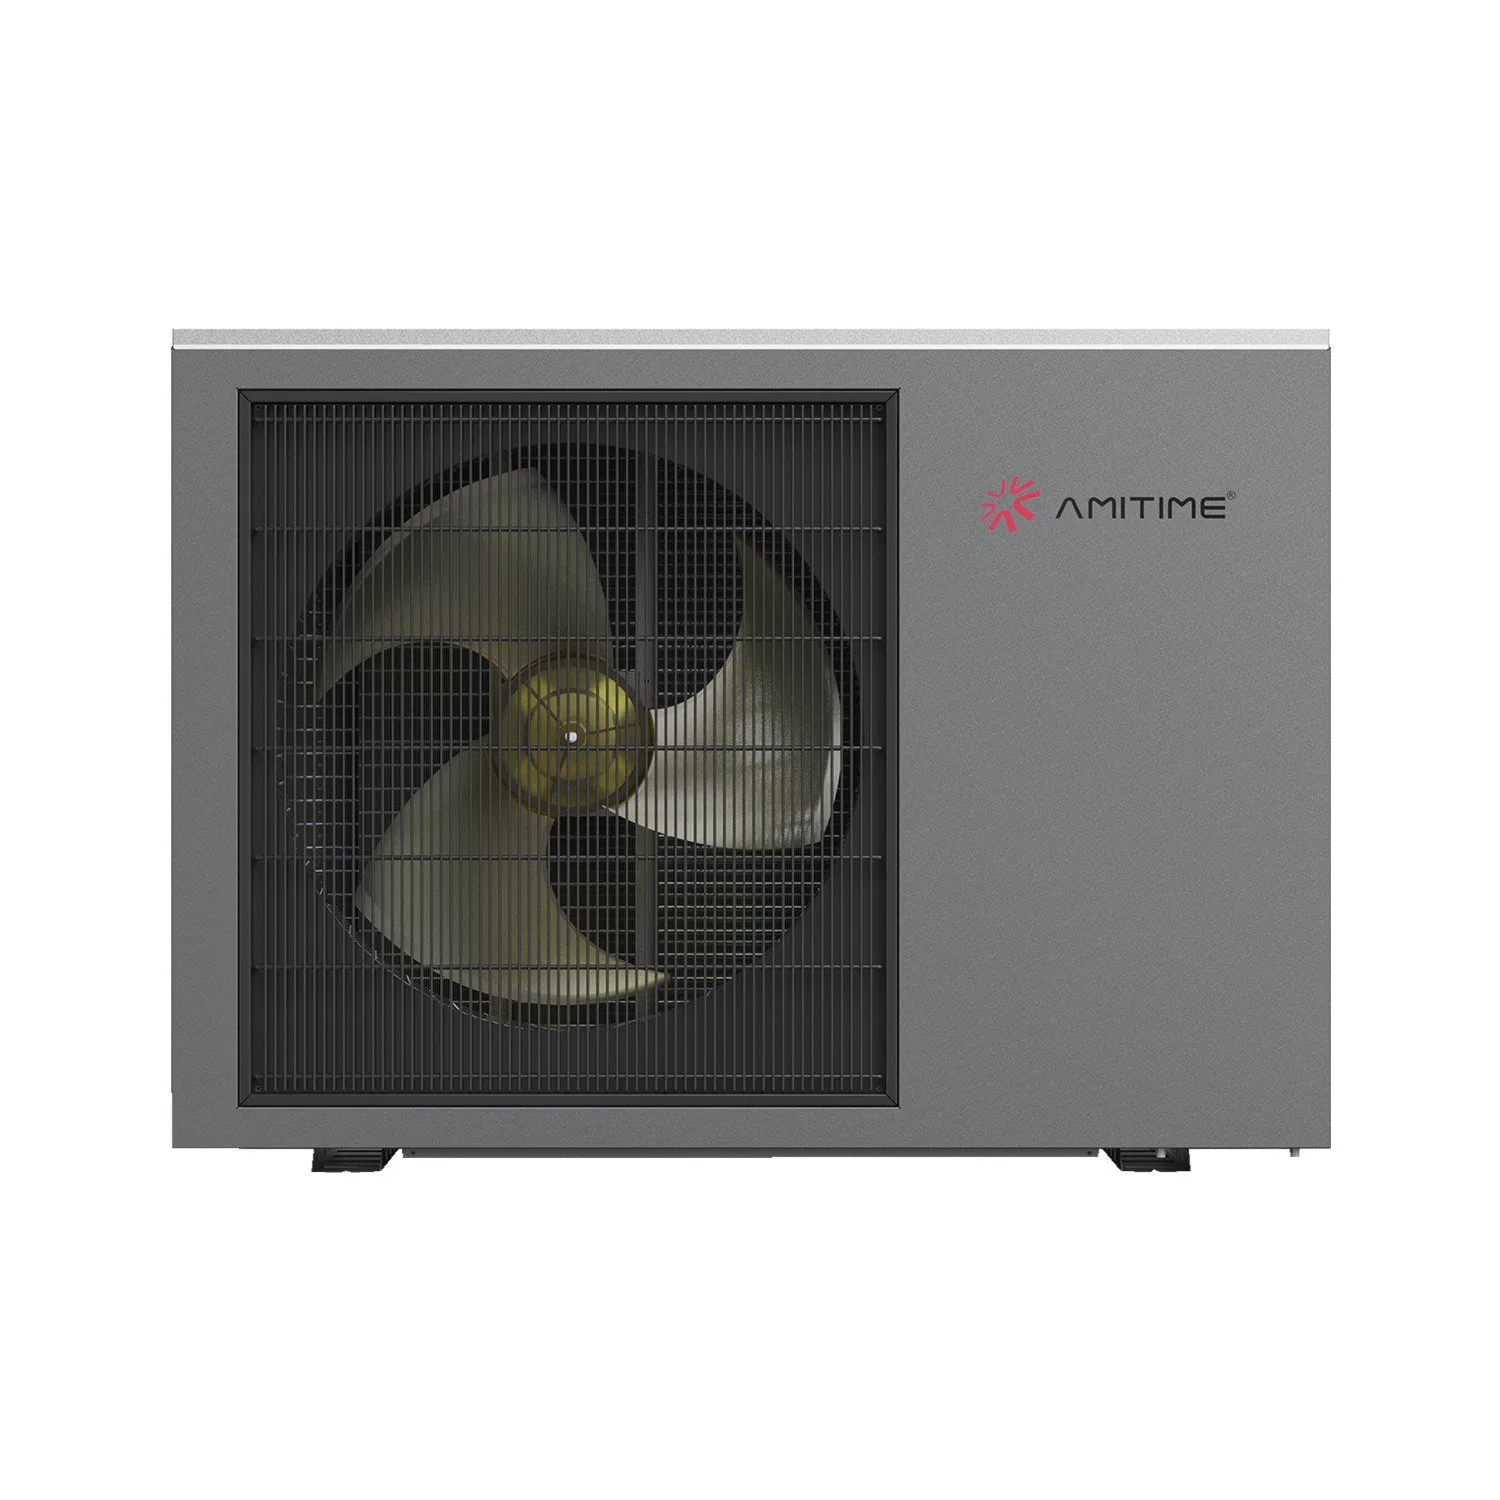 9kW R32 Home Hot Water/heating/cooling Evi Split Air Source Heat Pump System